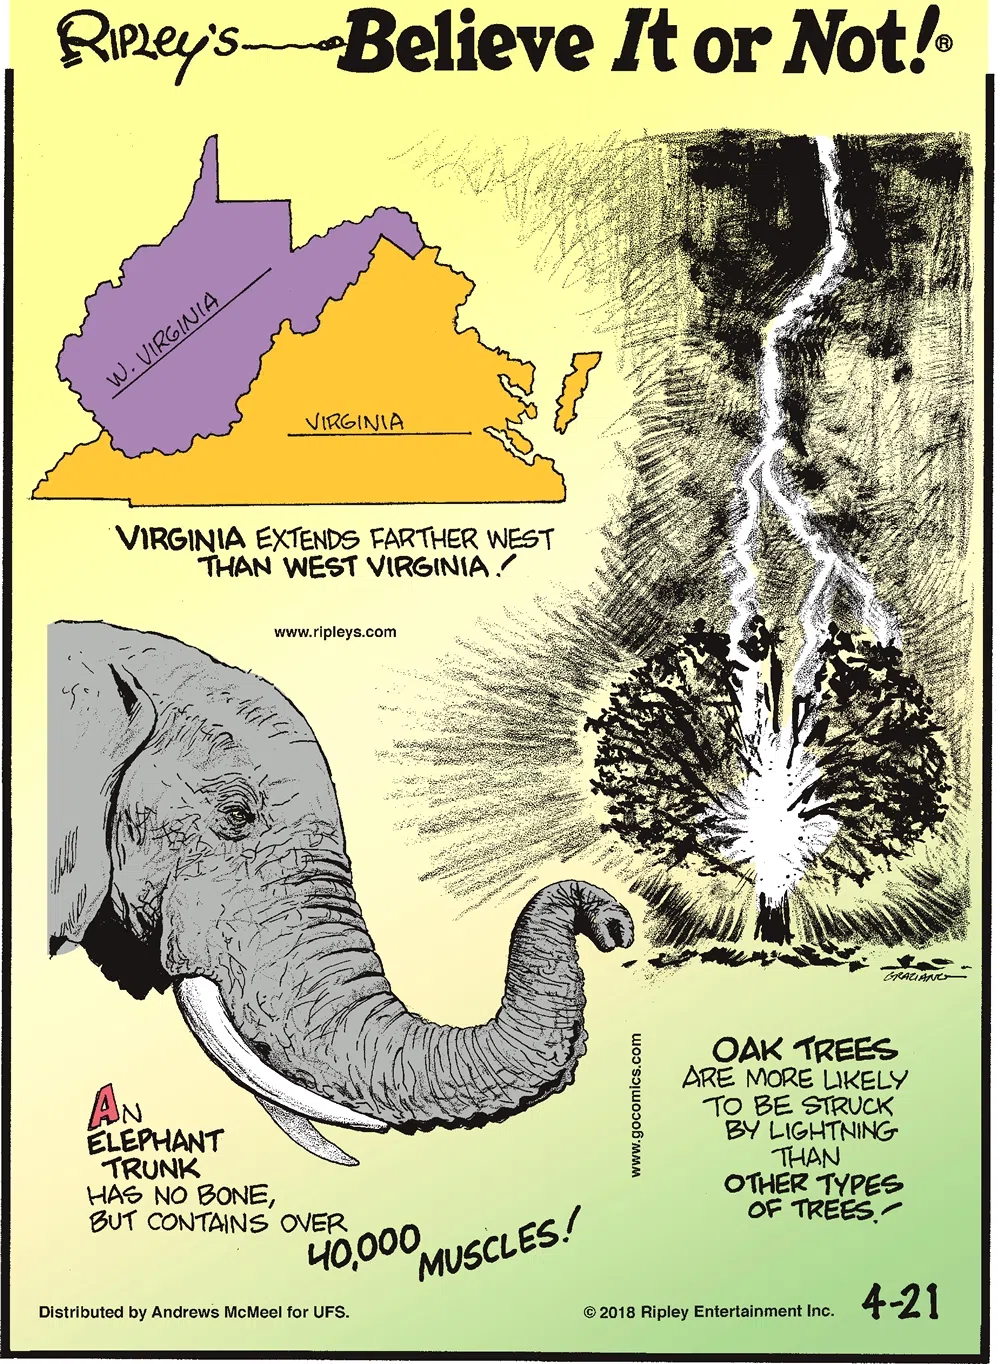 Virginia extends farther west than West Virginia!-------------------- An elephant trunk has no bone, but contains over 40,000 muscles!-------------------- Oak trees are more likely to be struck by lightning than other types of trees!